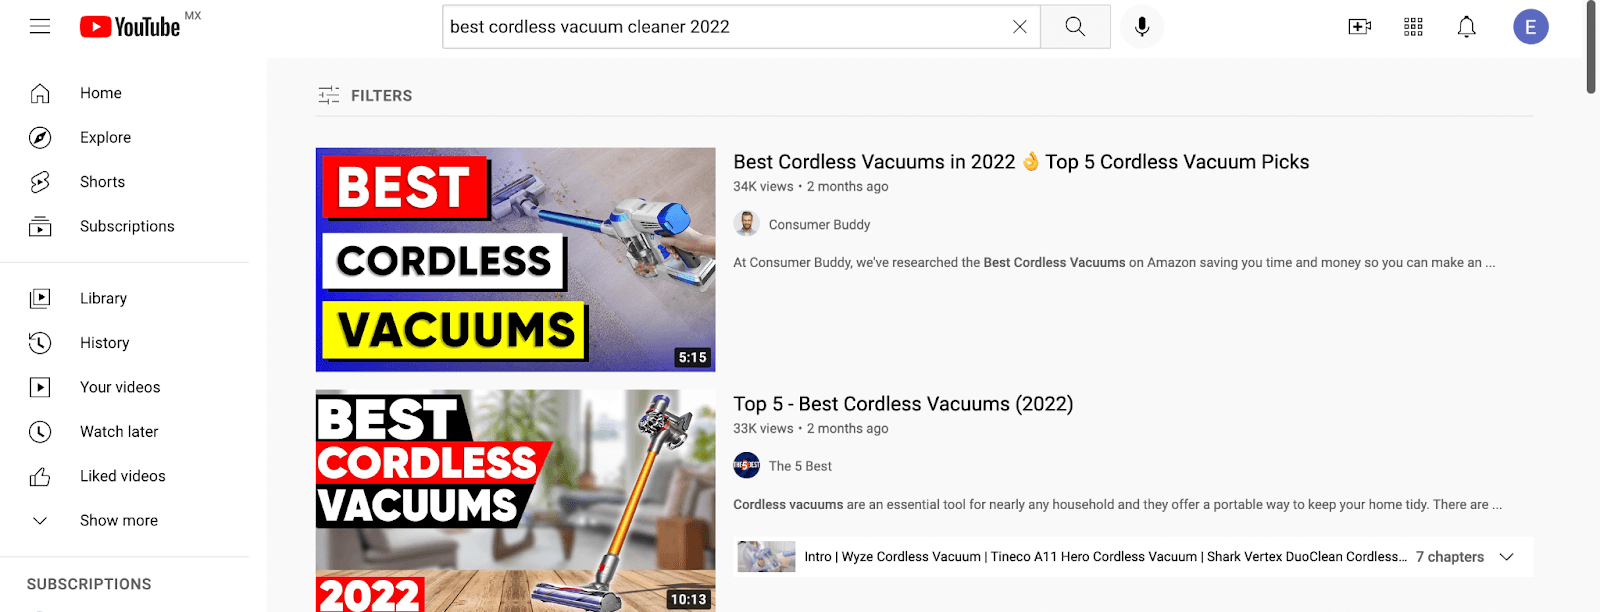 YouTube reviews on the best cordless vacuum cleaners on the market in 2022.